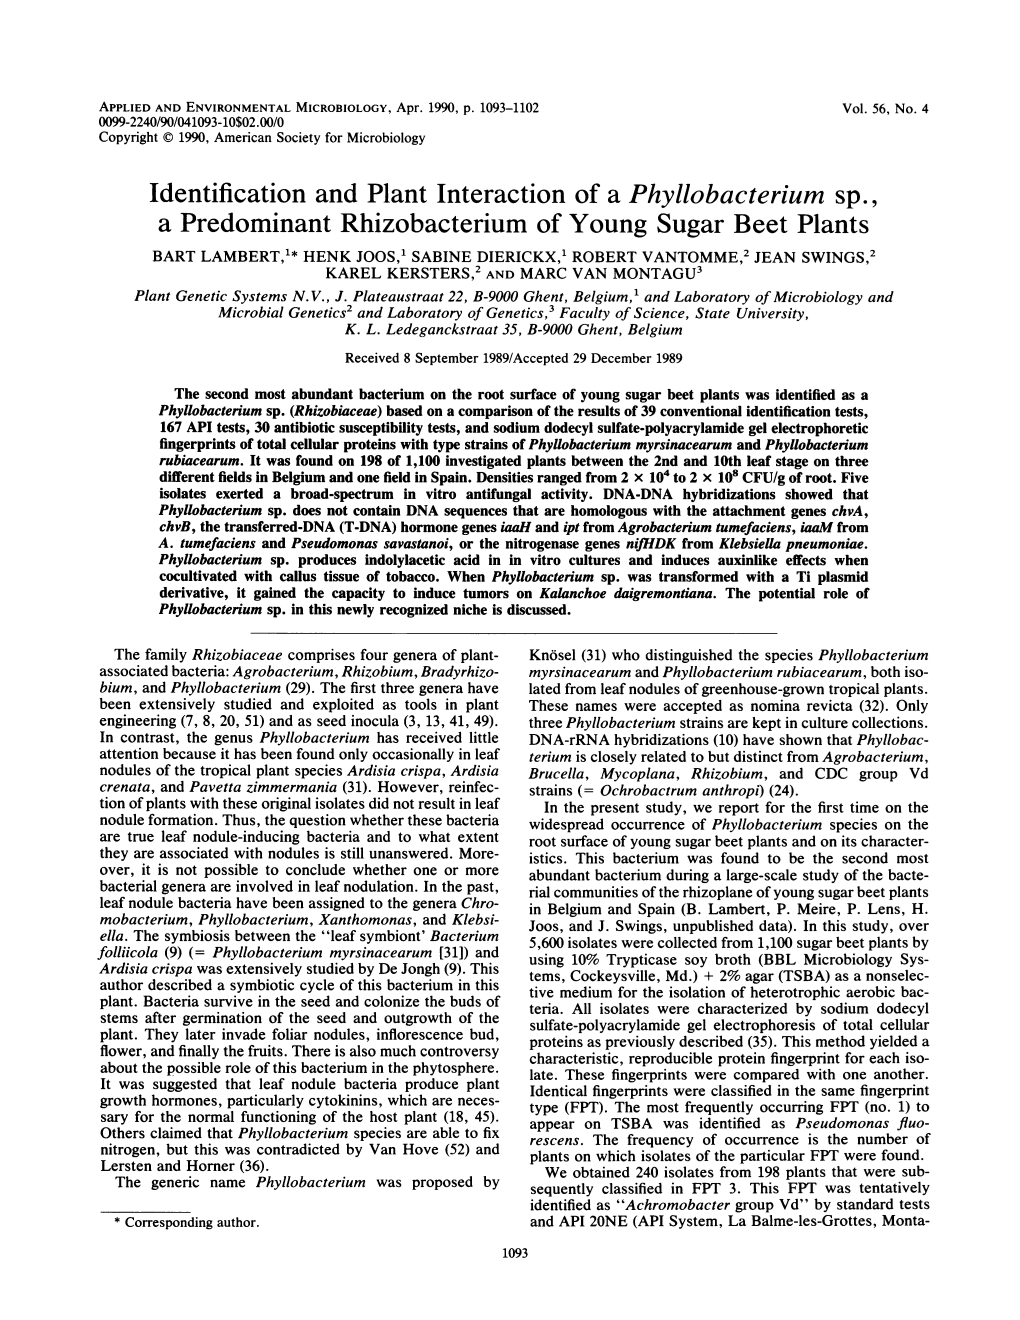 Identification and Plant Interaction of a Phyllobacterium Sp